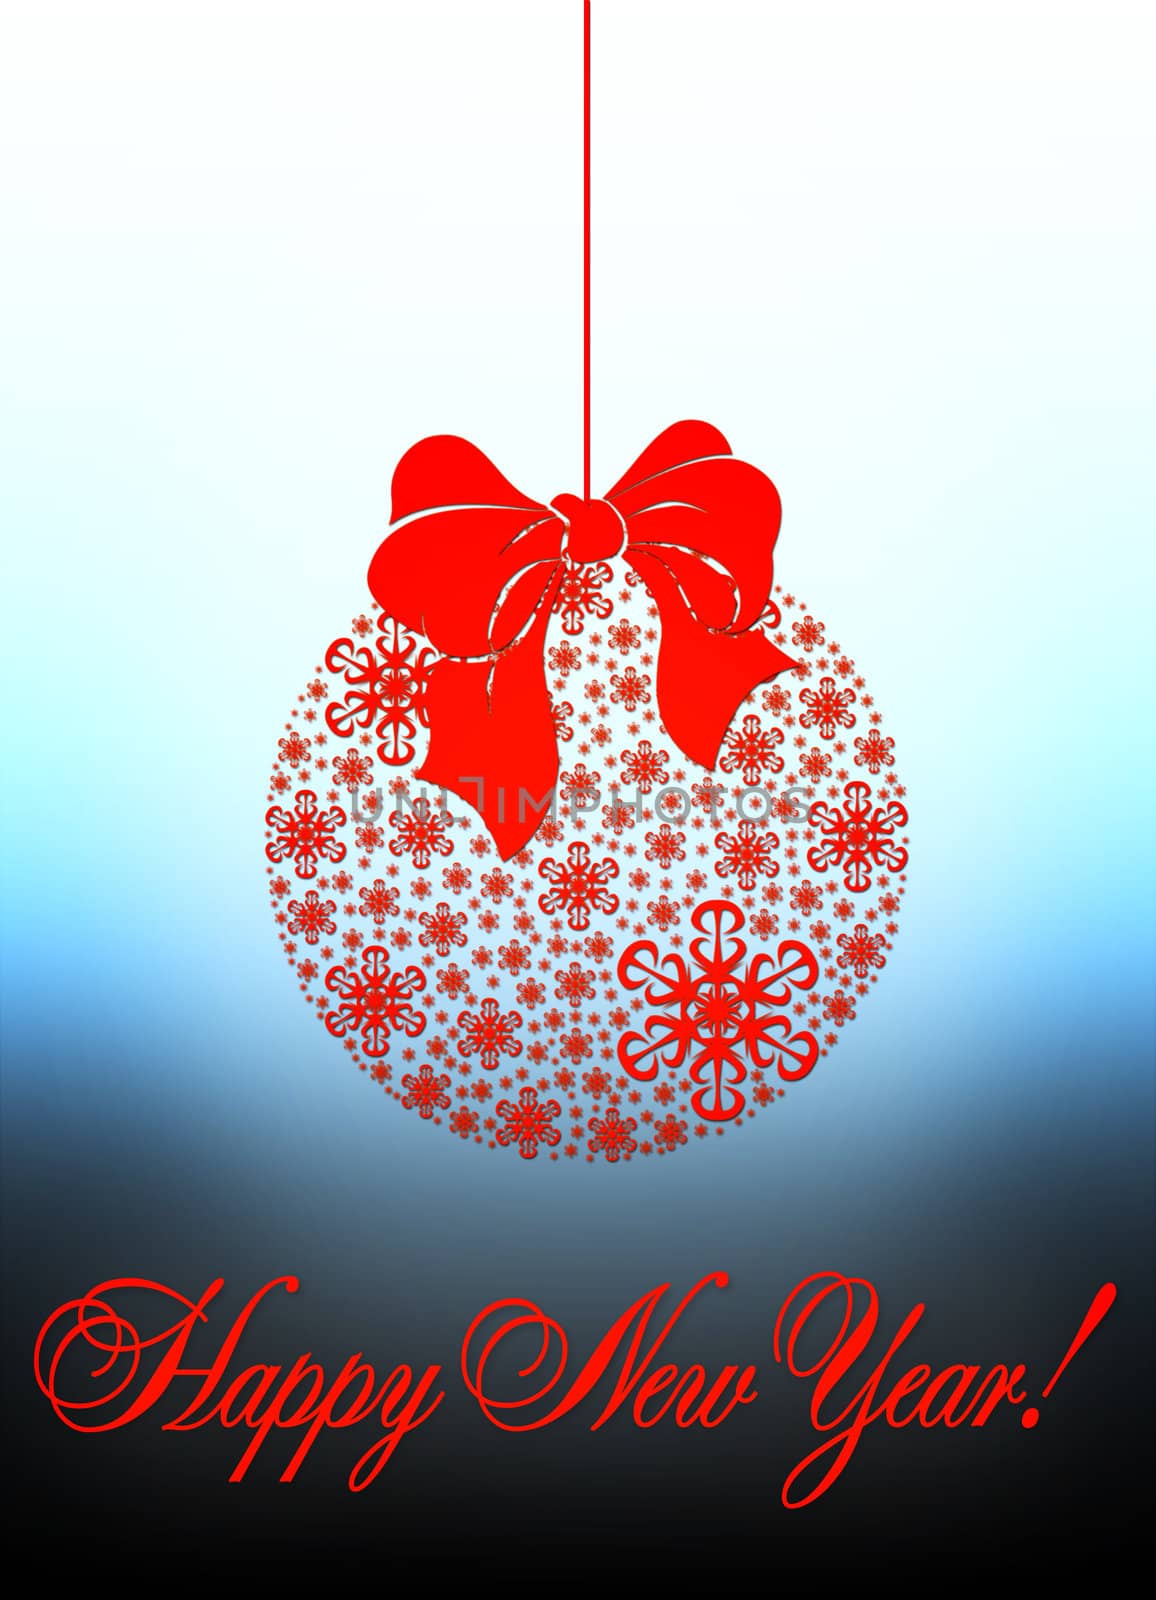 2012 Happy New Year greeting card or background